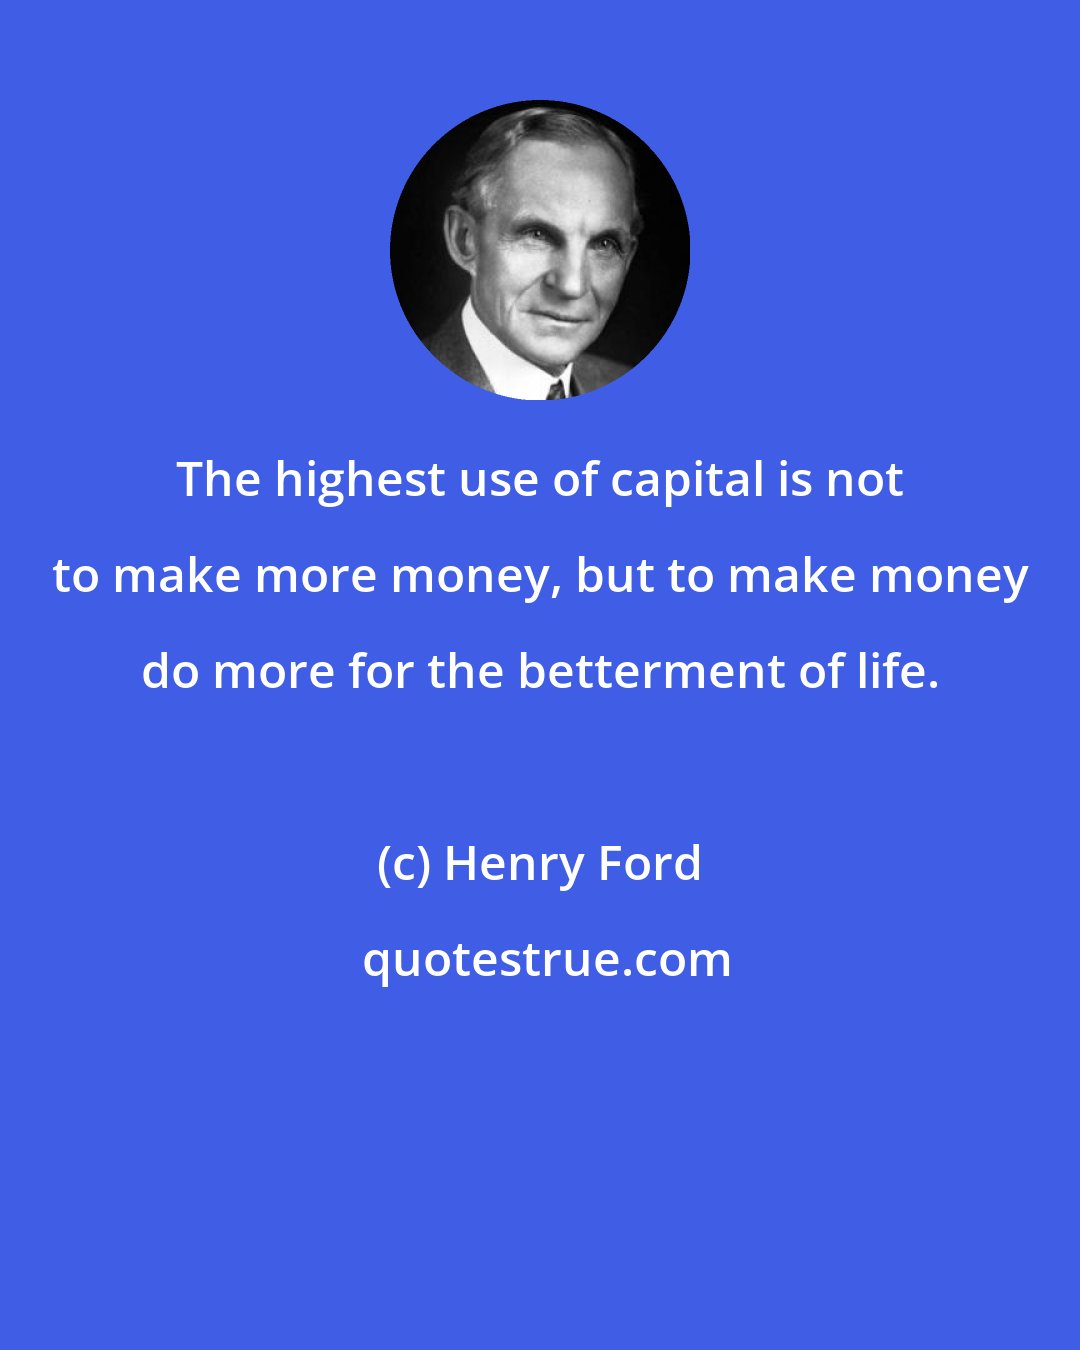 Henry Ford: The highest use of capital is not to make more money, but to make money do more for the betterment of life.